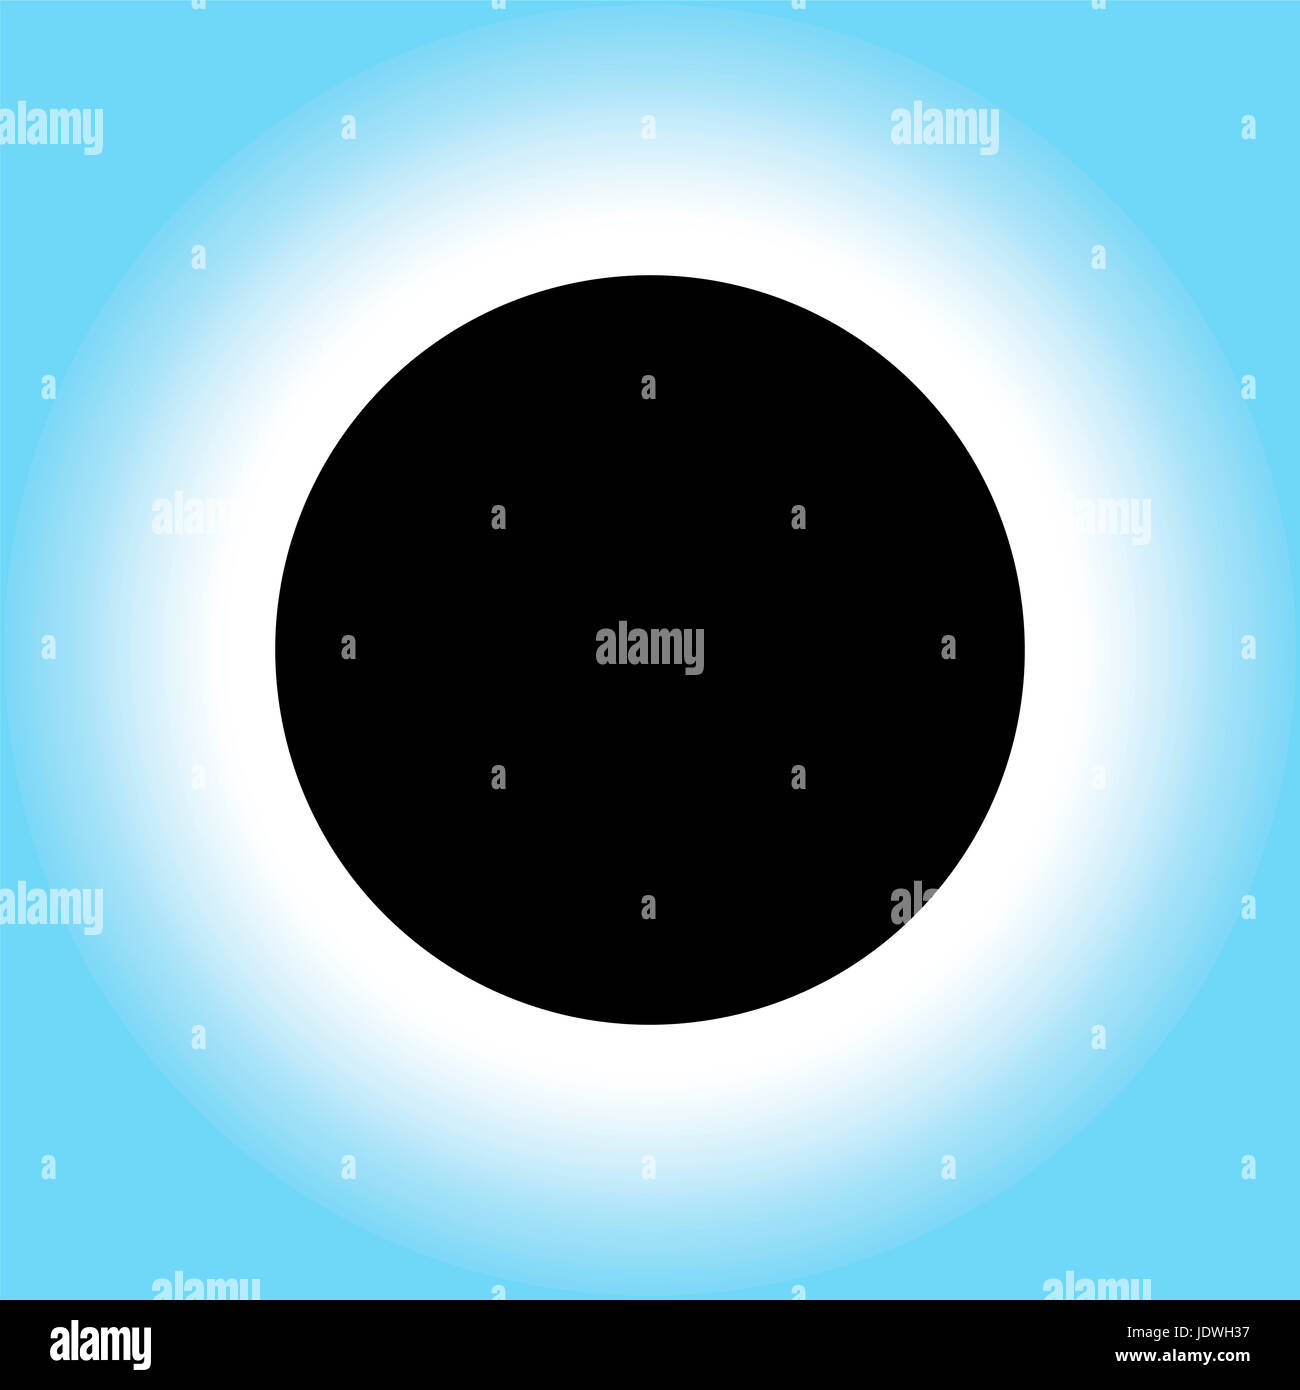 Solar eclipse icon - symbolic illustration of a black circle on a white to blue gradient radial background. Stock Photo